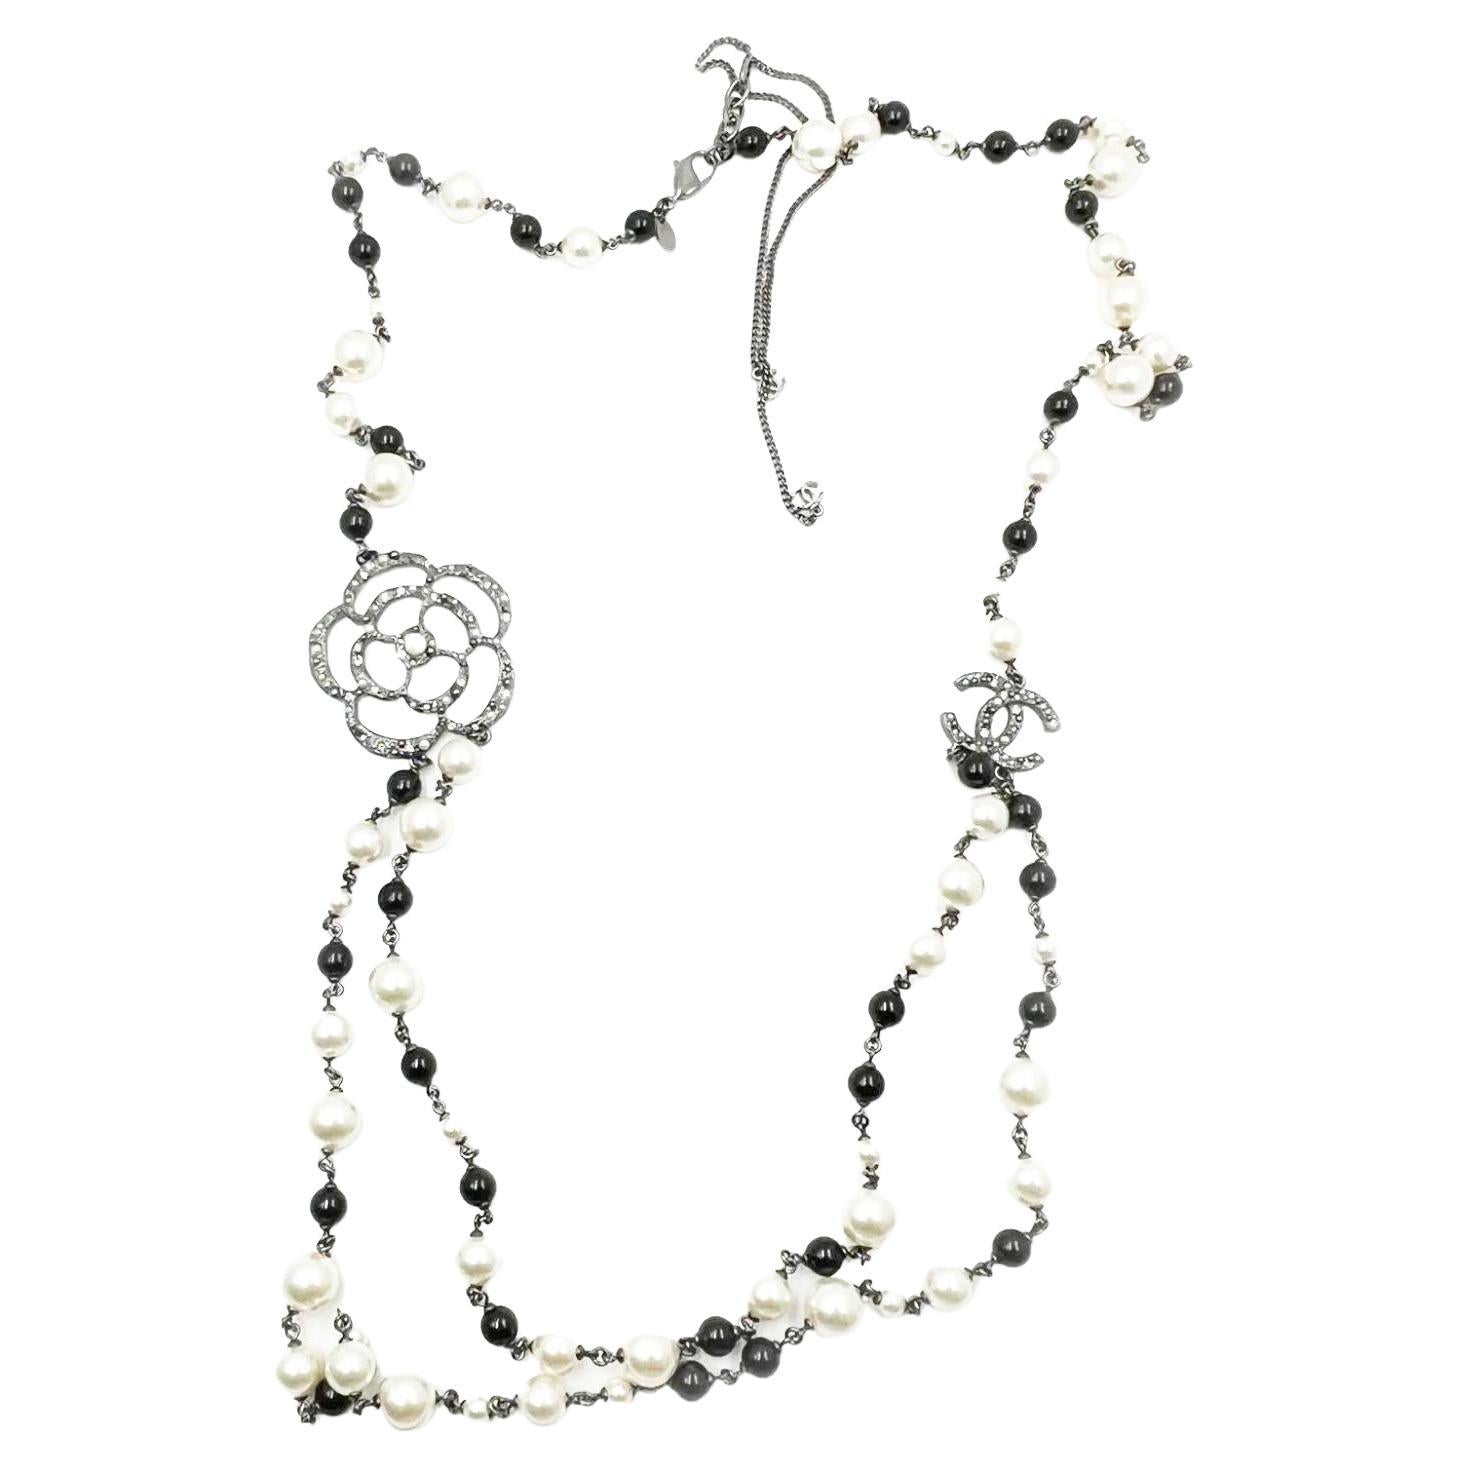 Chanel Gunmetal CC Camellia Pearl Black Beads 2 Strand Long Necklace